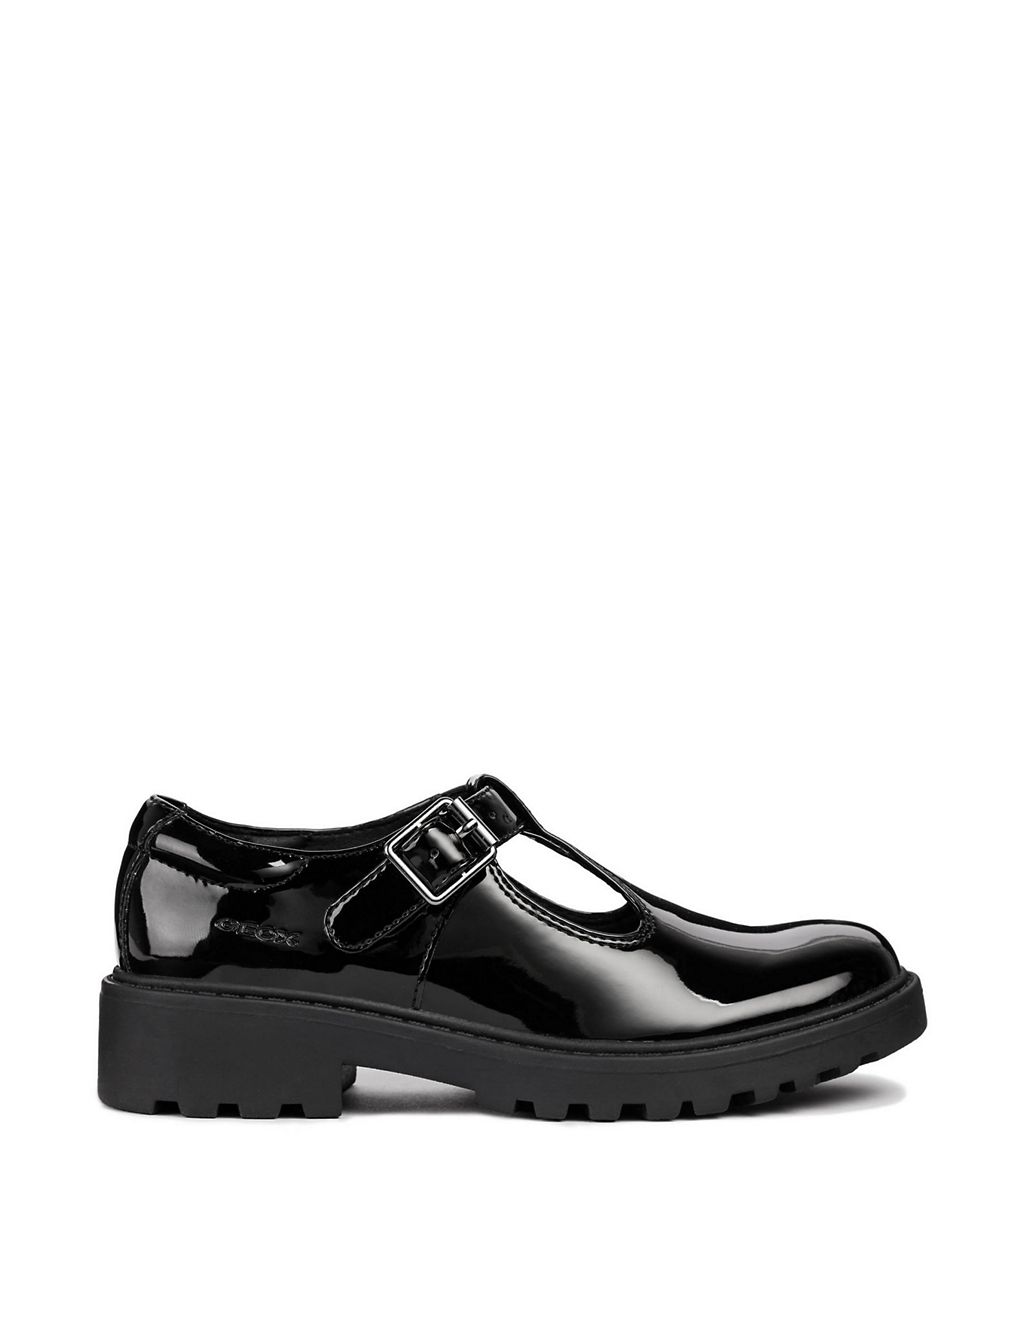 Kids' Patent Leather T-Bar School Shoes (13 Small - 6 Large) 3 of 6